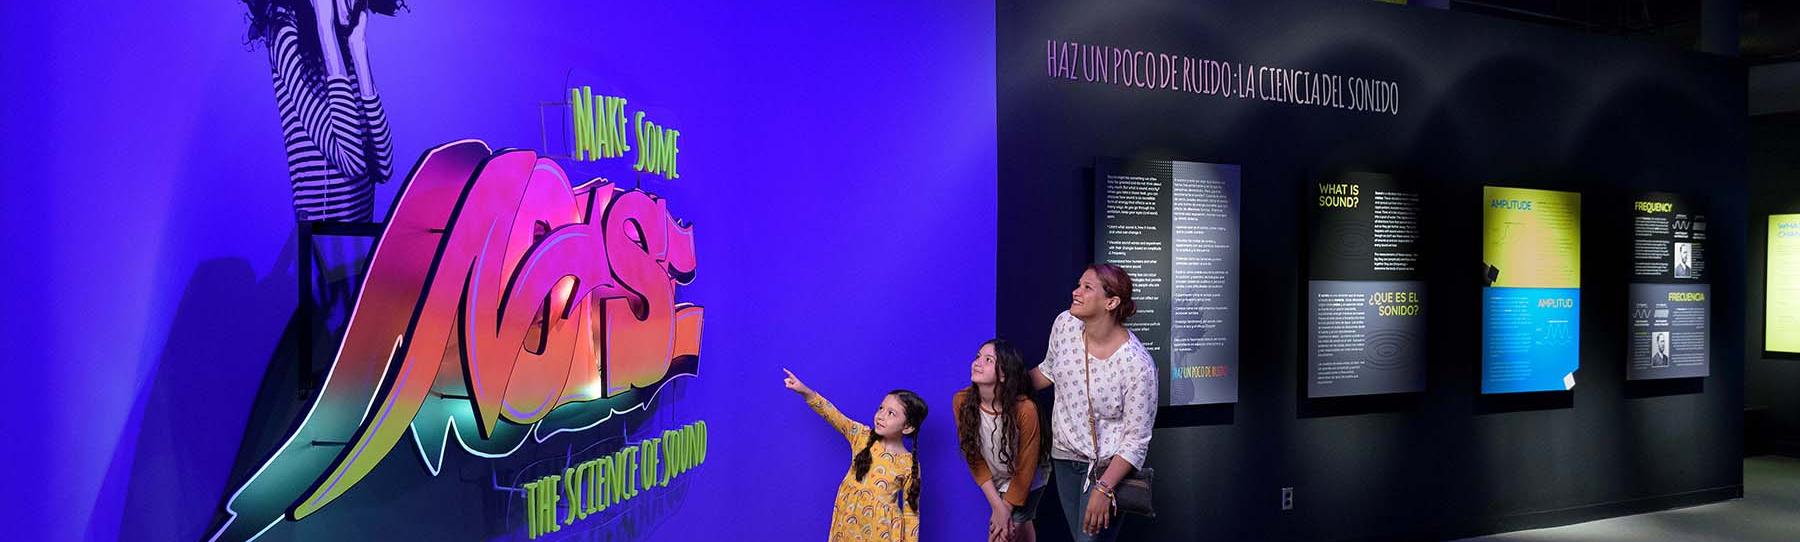 A Mother with two daughters look at the exhibit entrance which features a large sign with the exhibit title done in a graffiti art style.